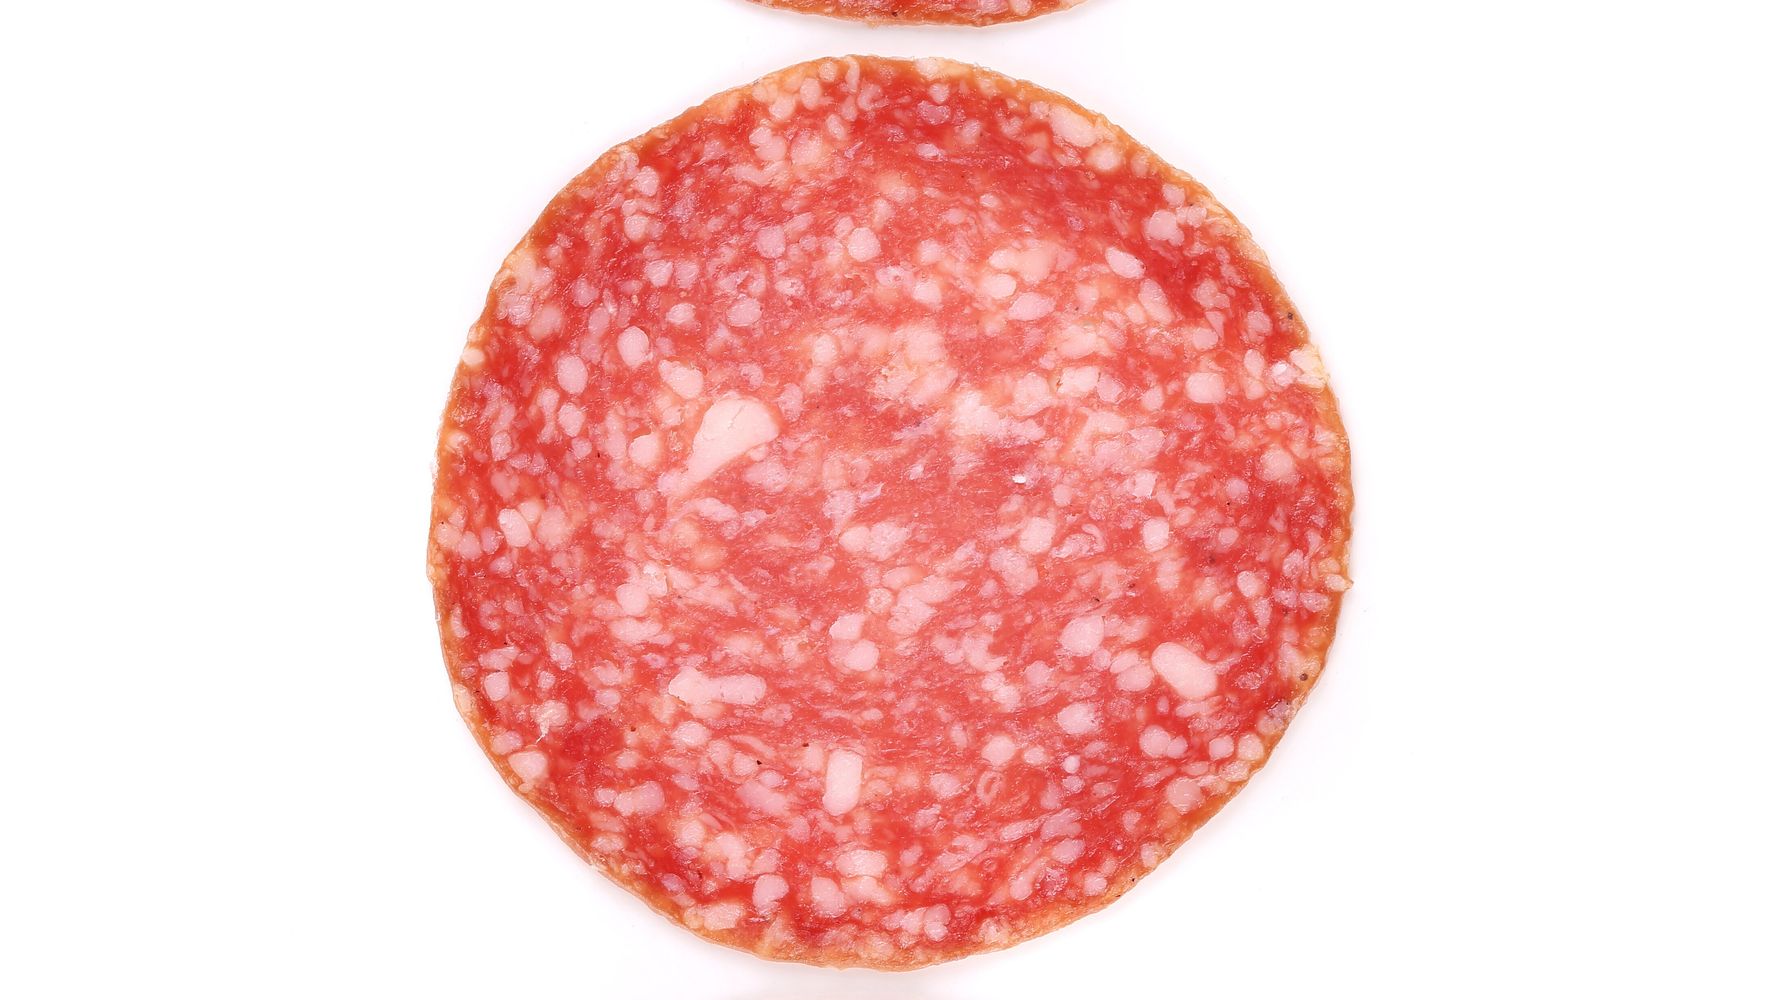 French scientist trolls Twitter by claiming a chorizo ​​slice is actually a distant star